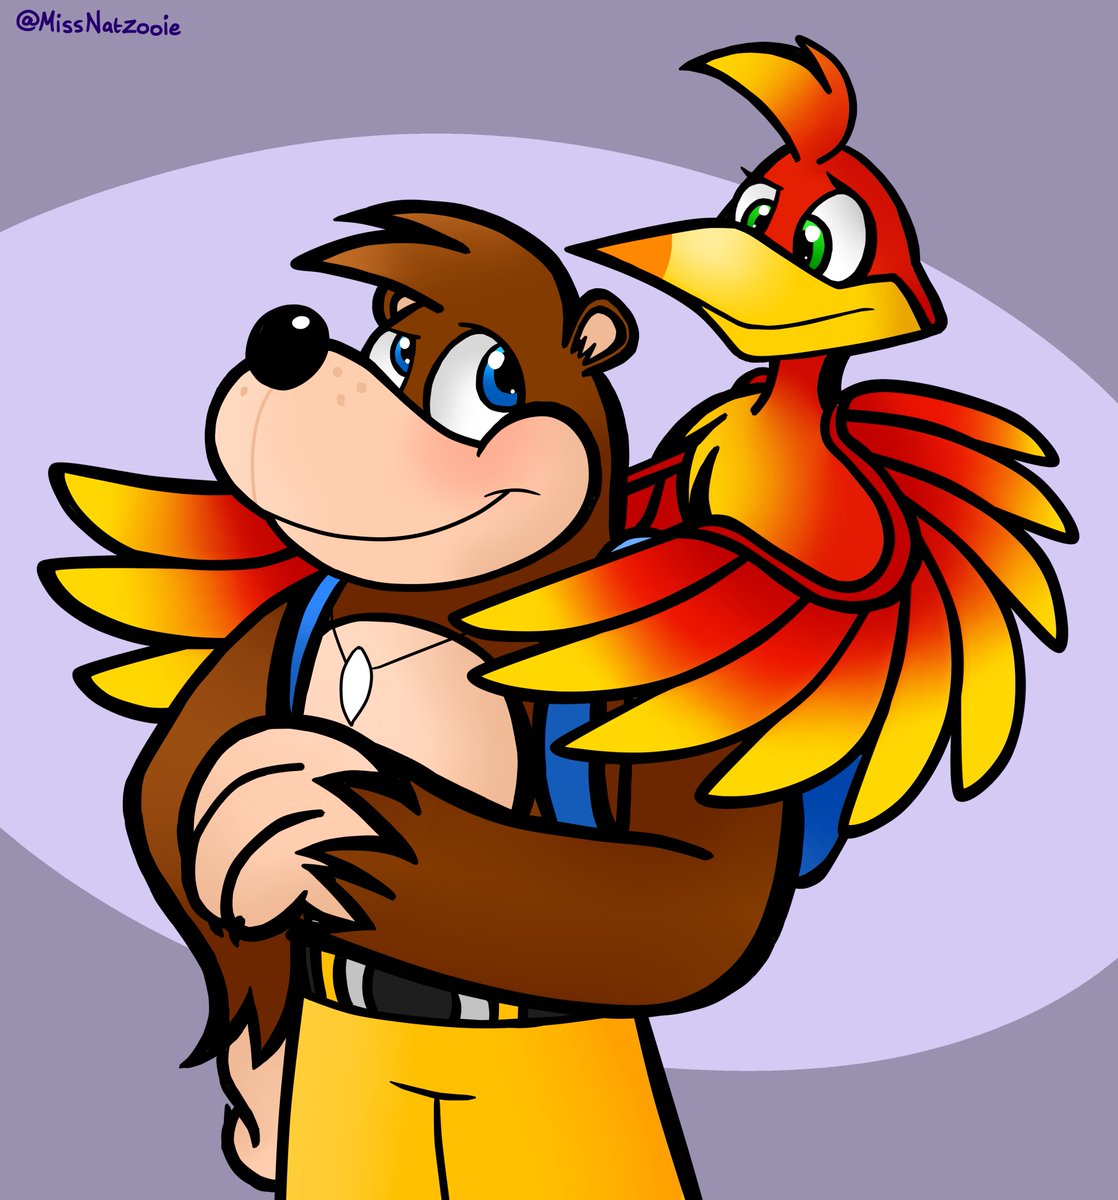 The heroic best friends from Spiral Mountain #BanjoKazooie